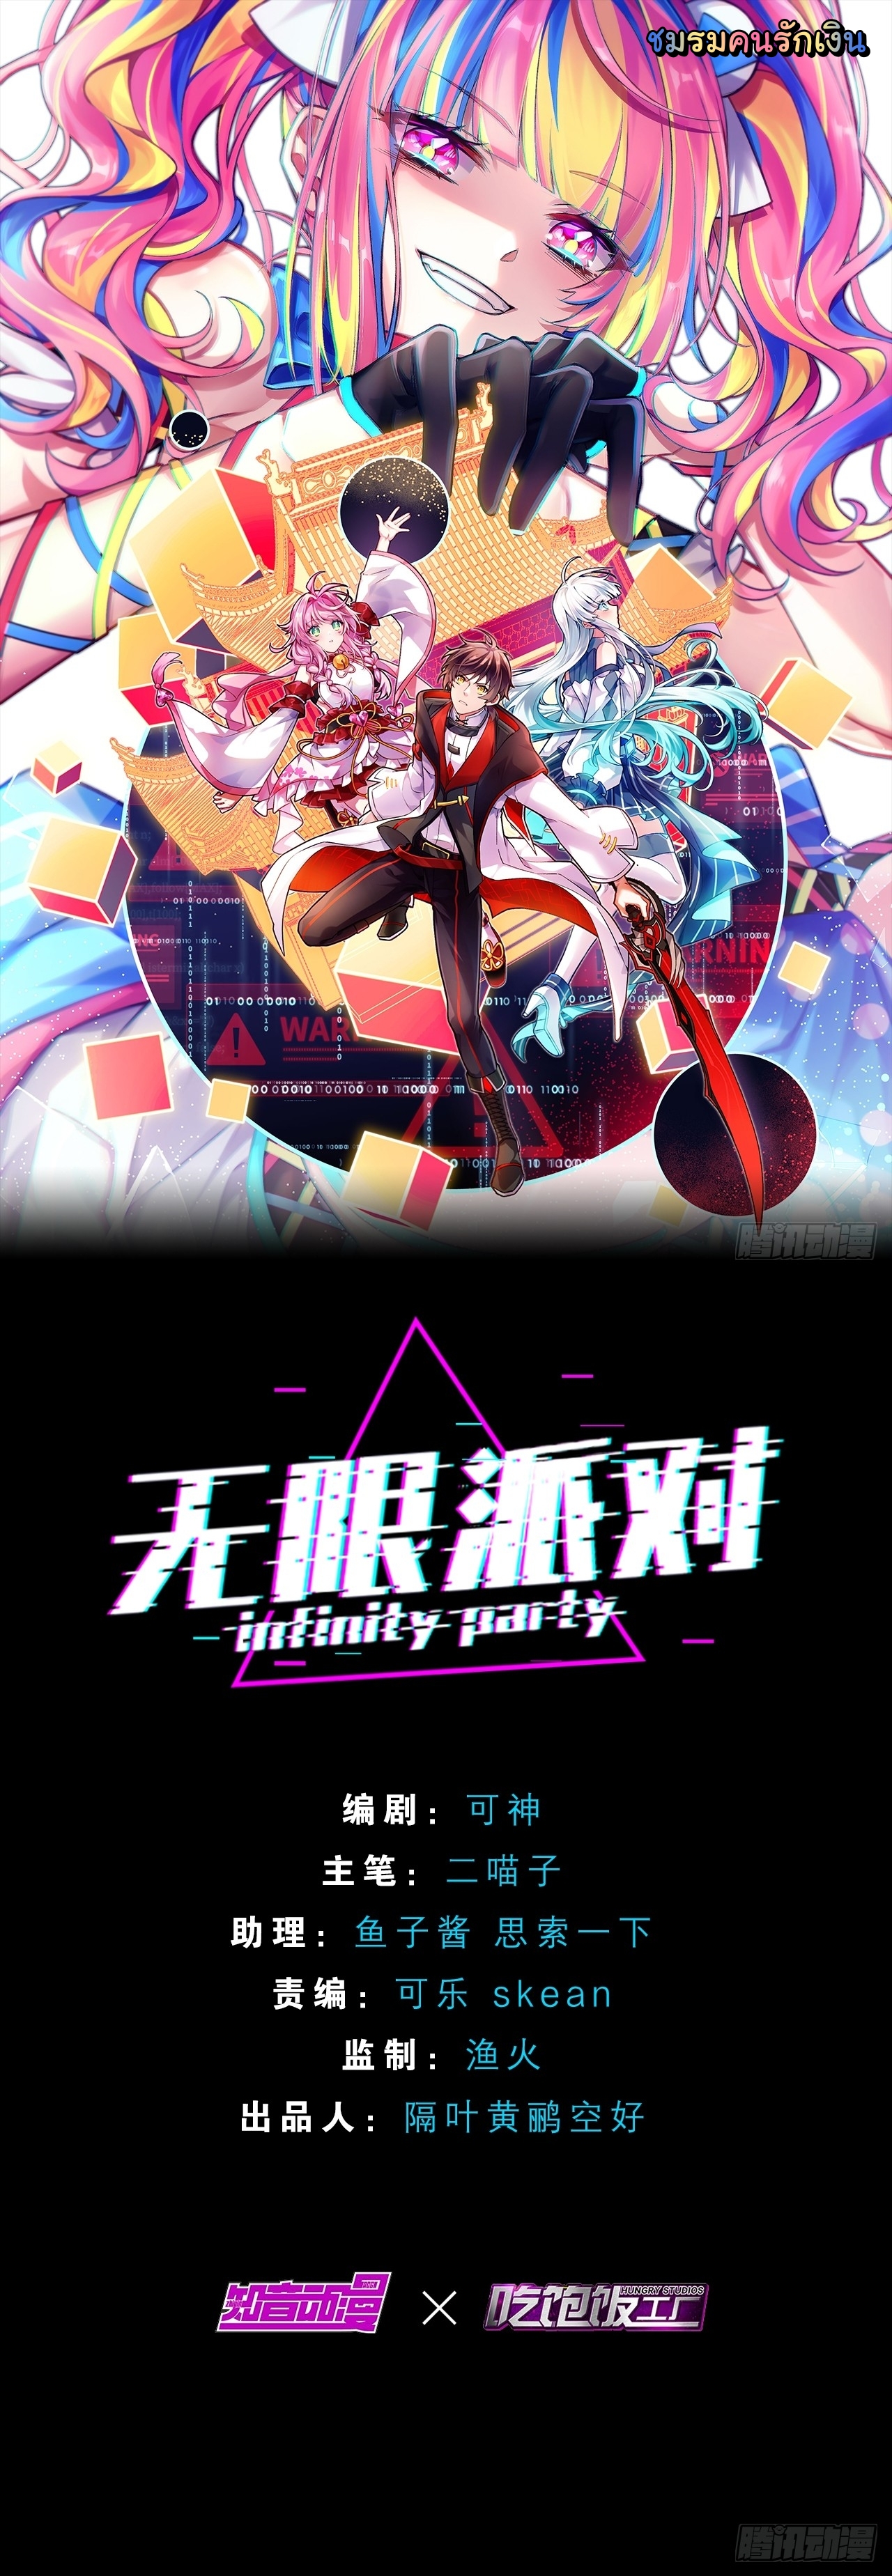 Infinity party 8 (1)